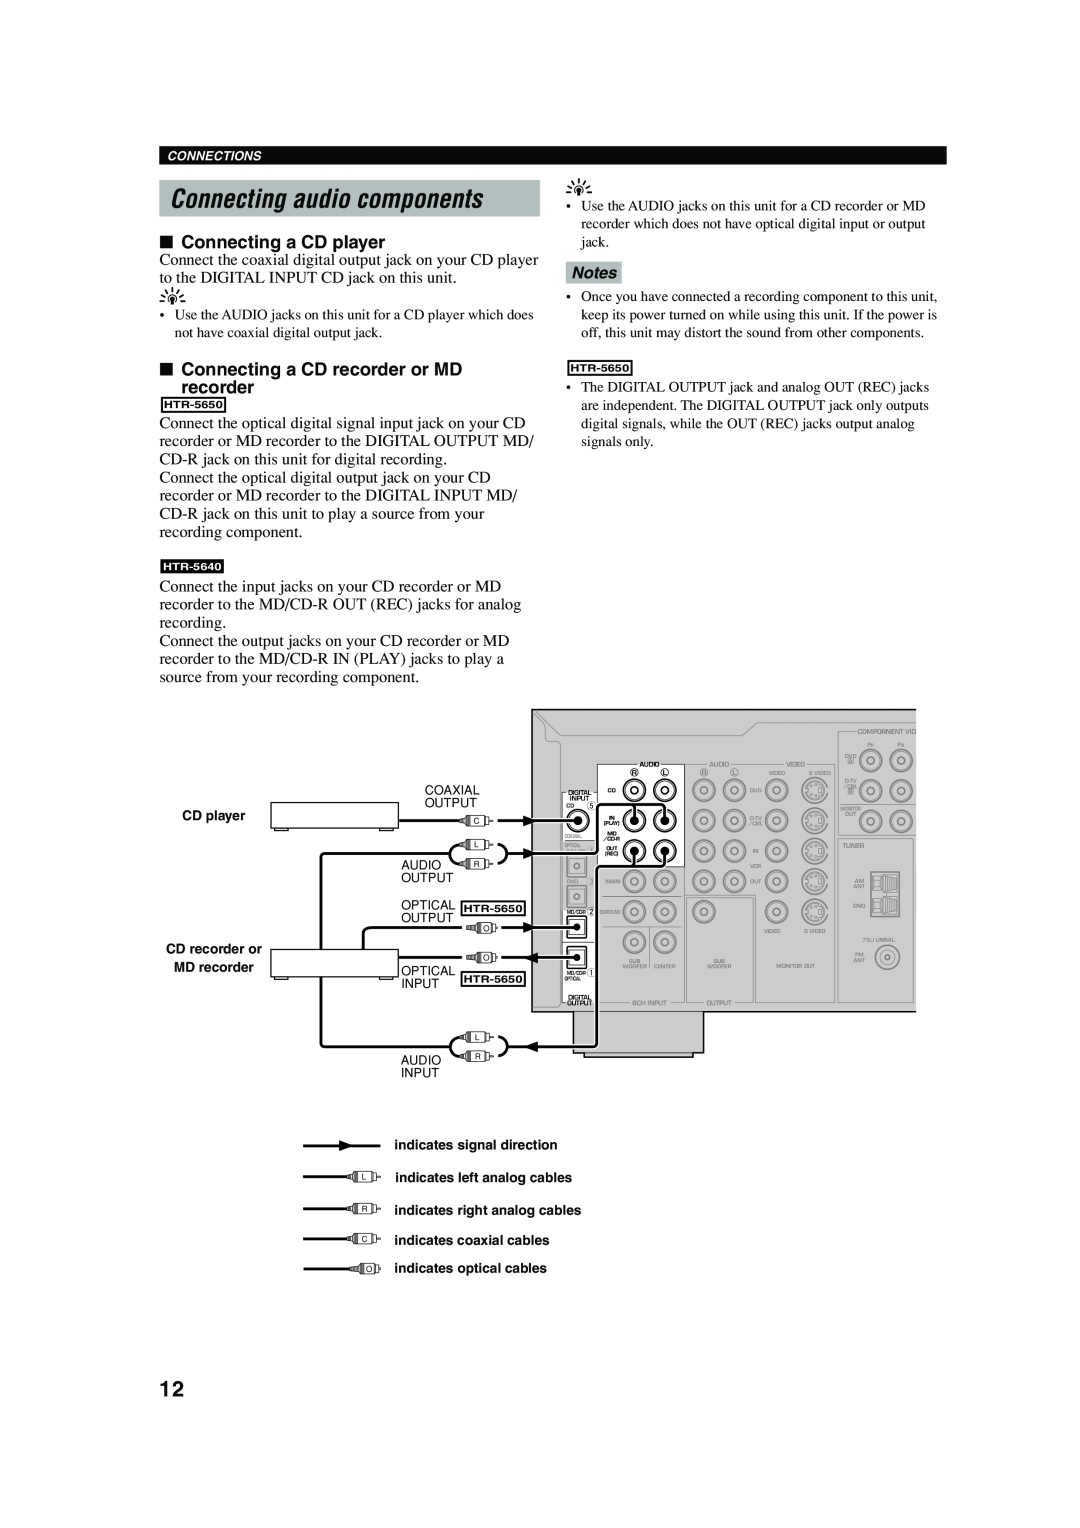 Yamaha HTR-5640 owner manual Connecting audio components, Connecting a CD player, Connecting a CD recorder or MD recorder 